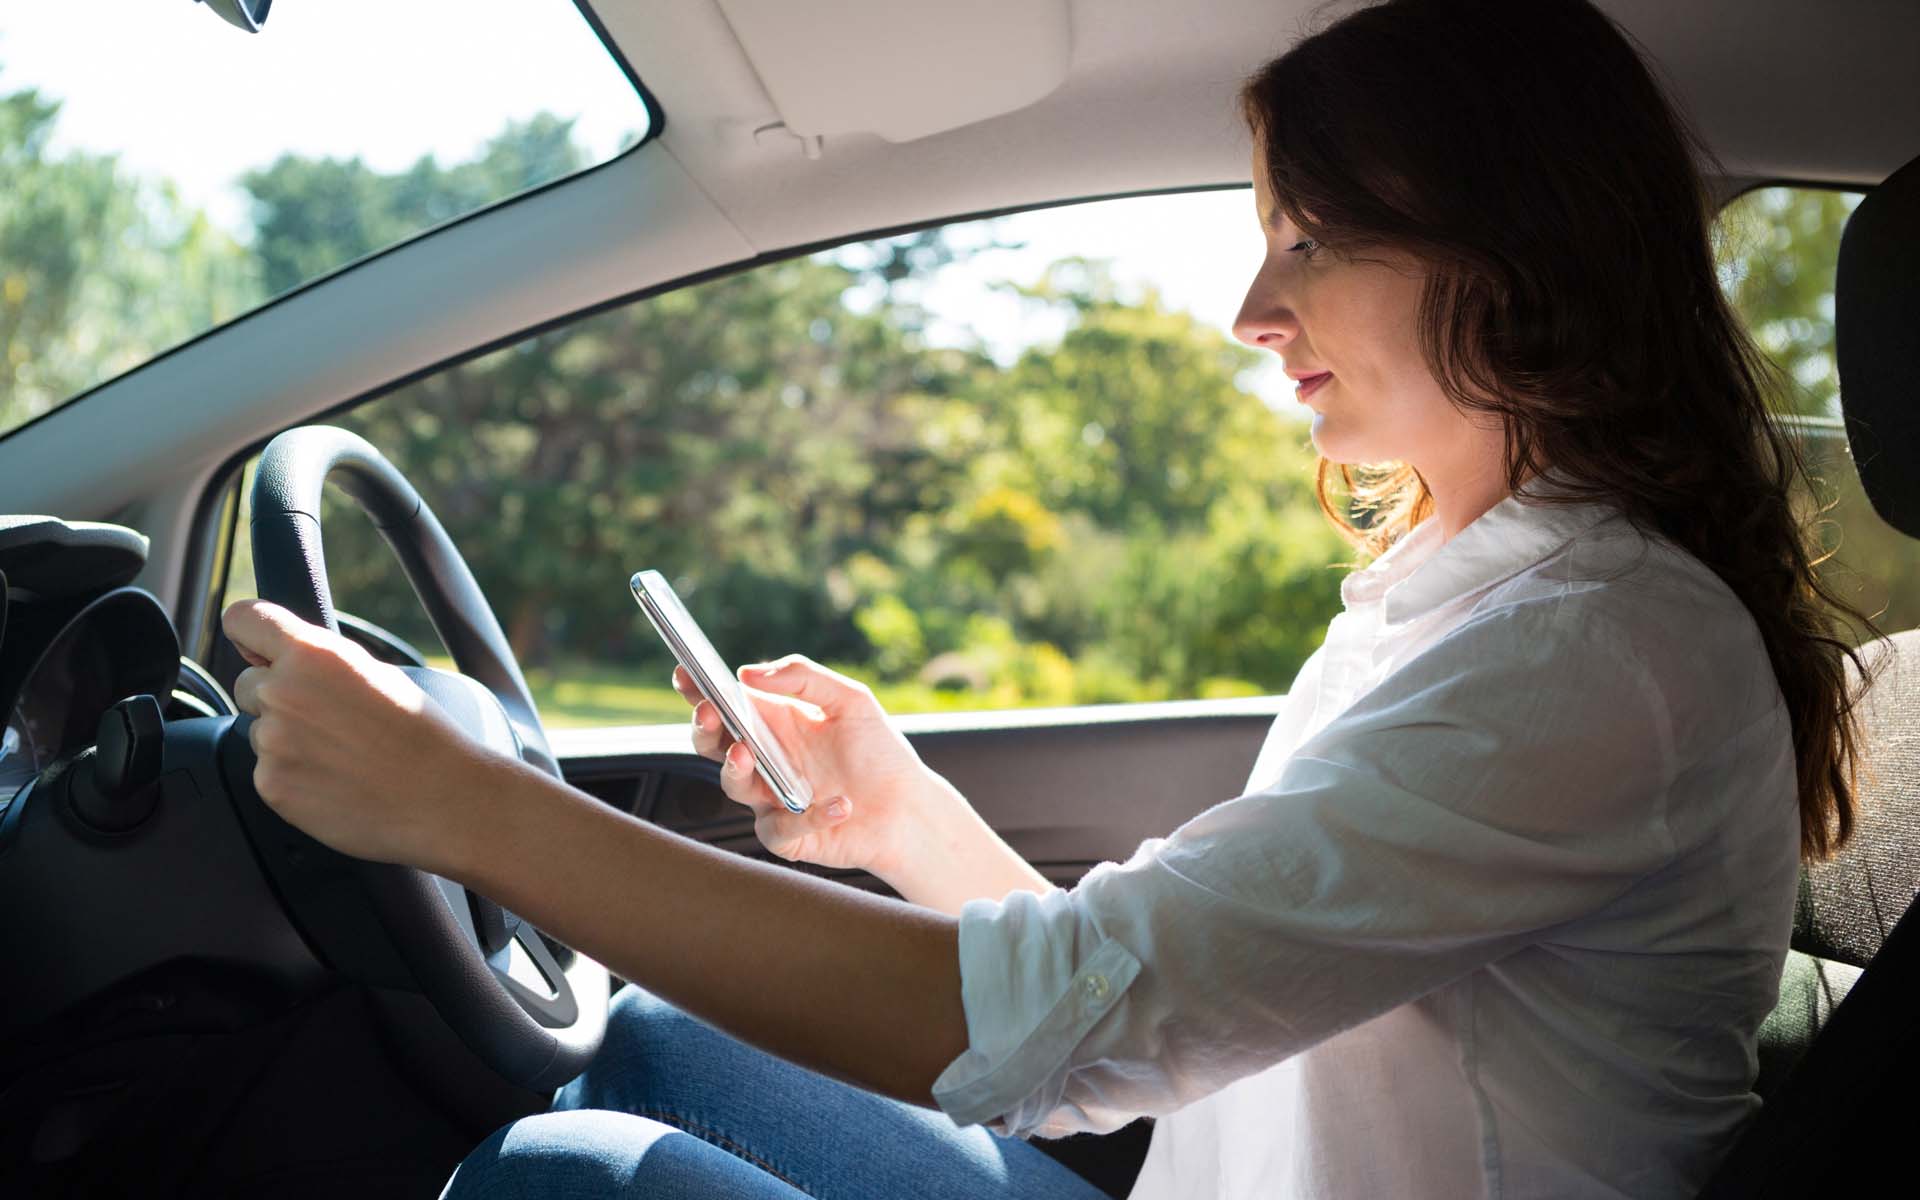 Blog - Students and distracted driving